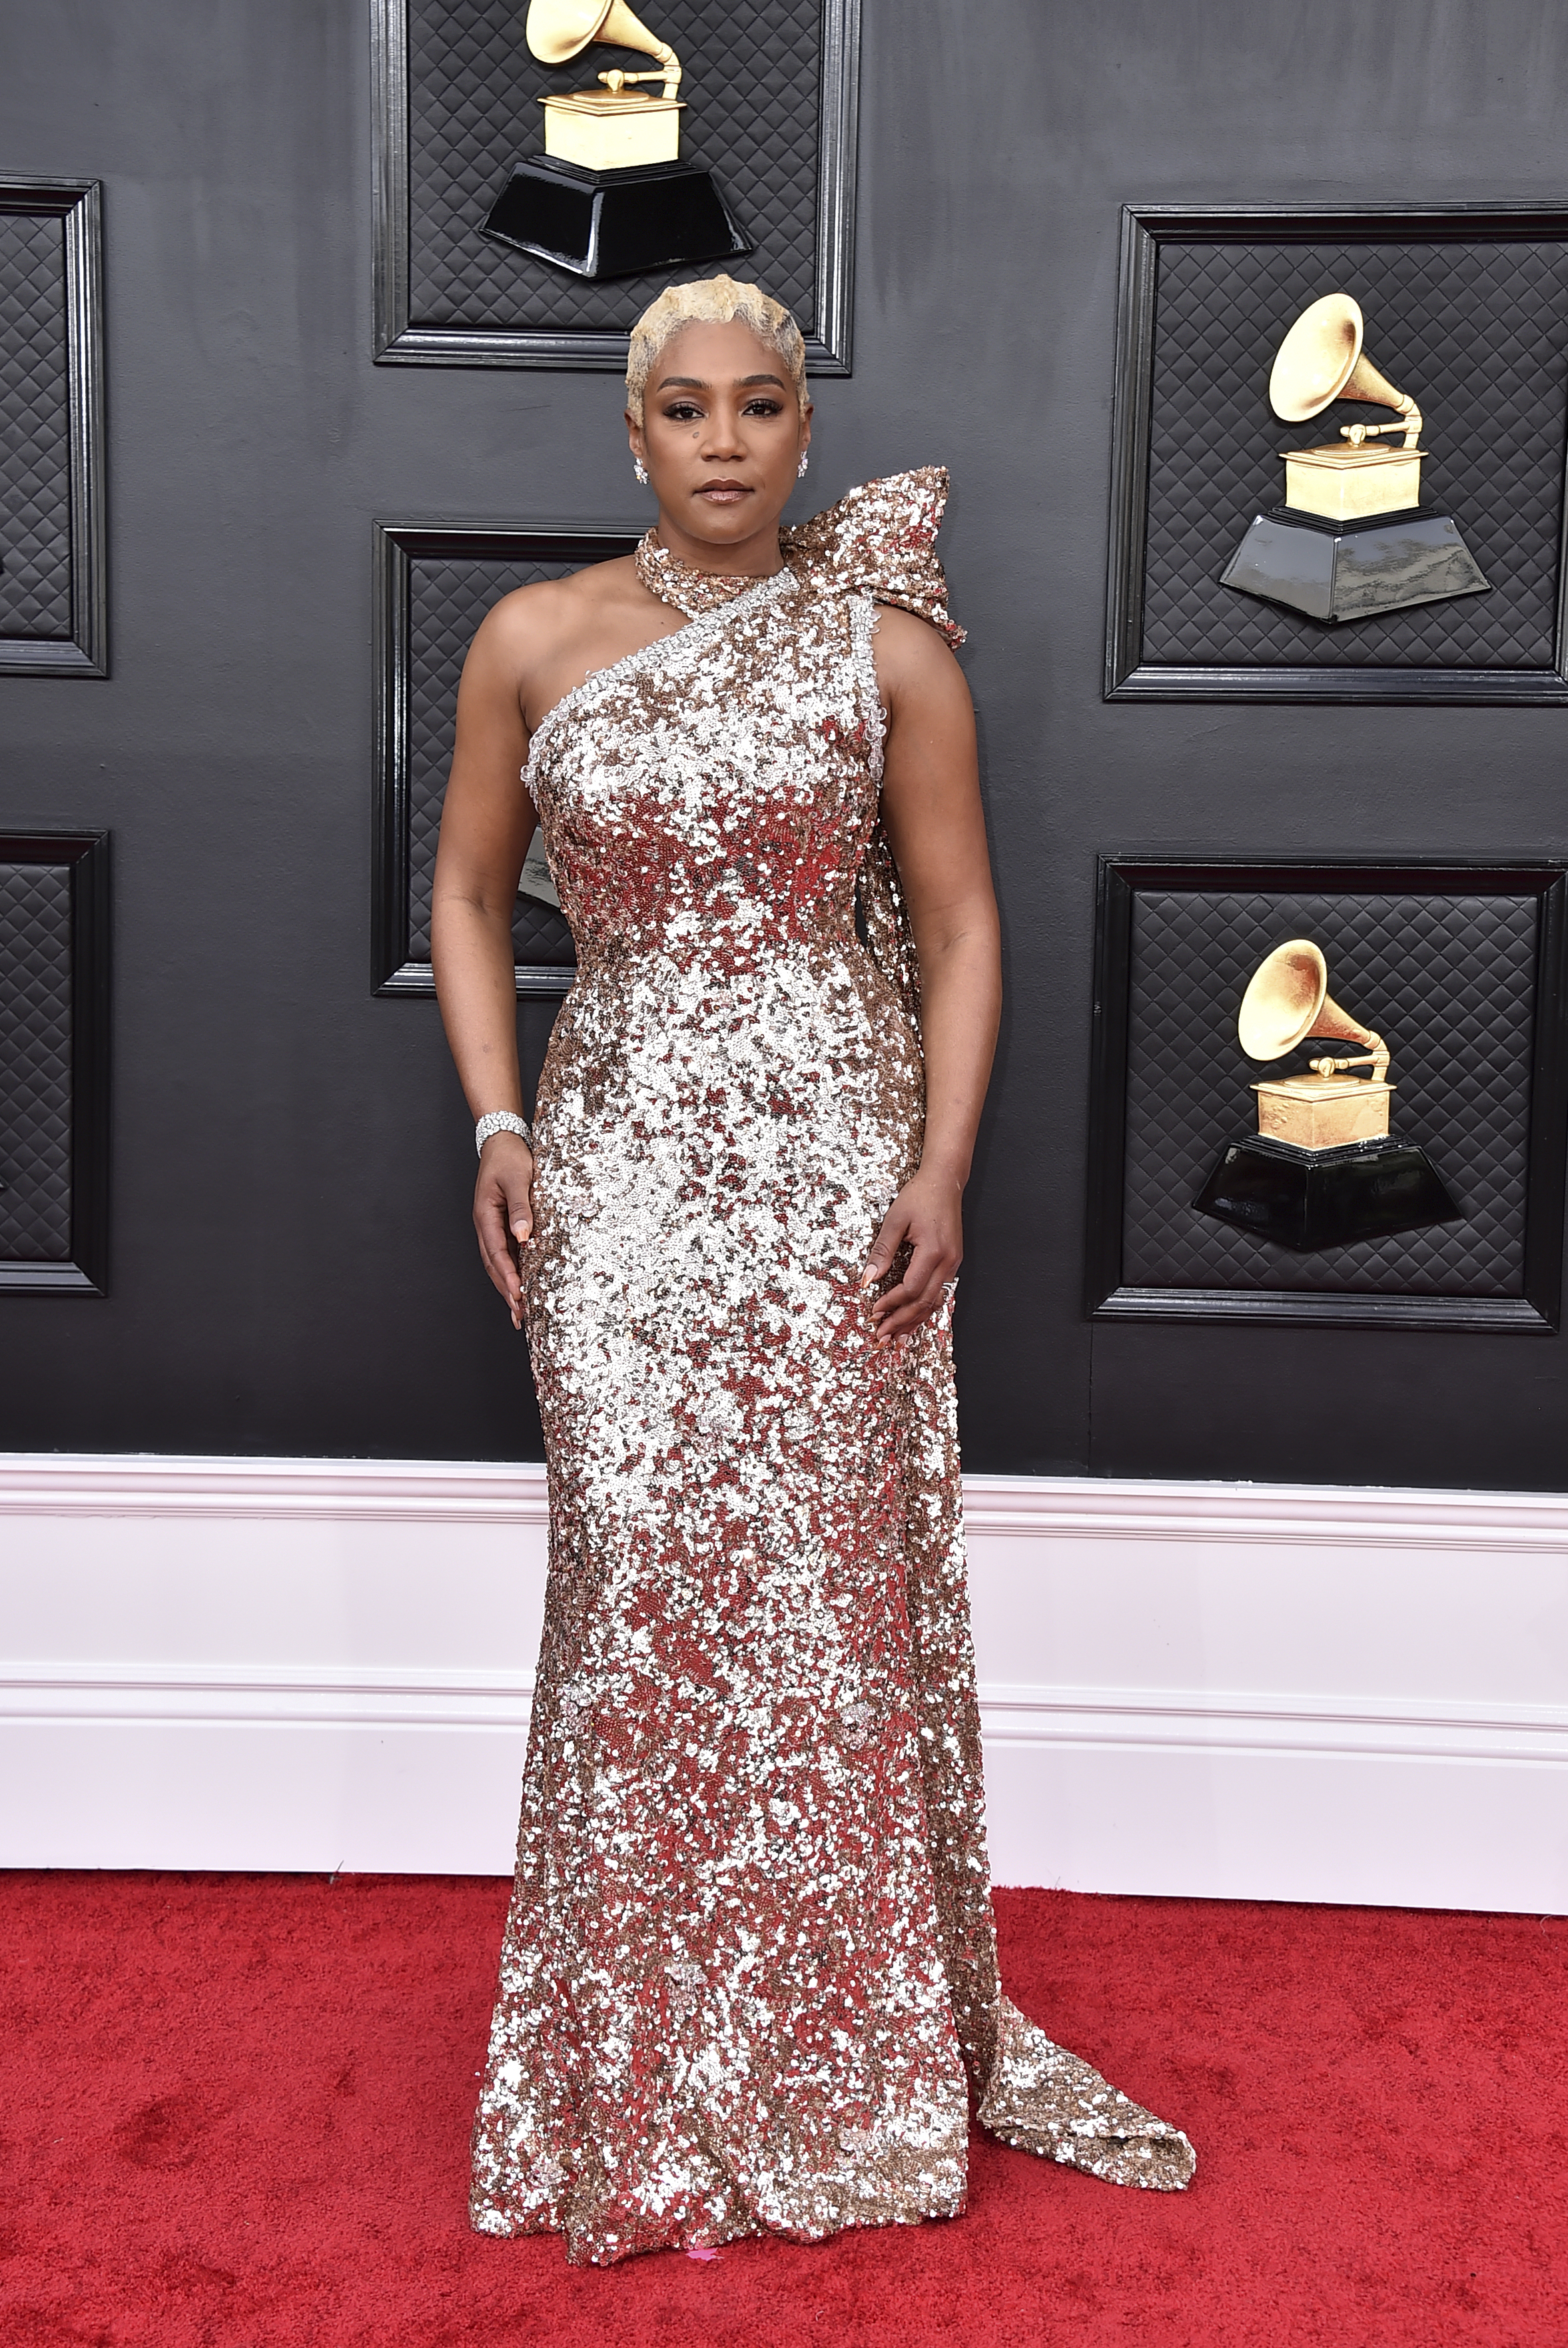 tiffany haddish poses wearing a glittering gold one-shoulder long gown on the grammys red carpet